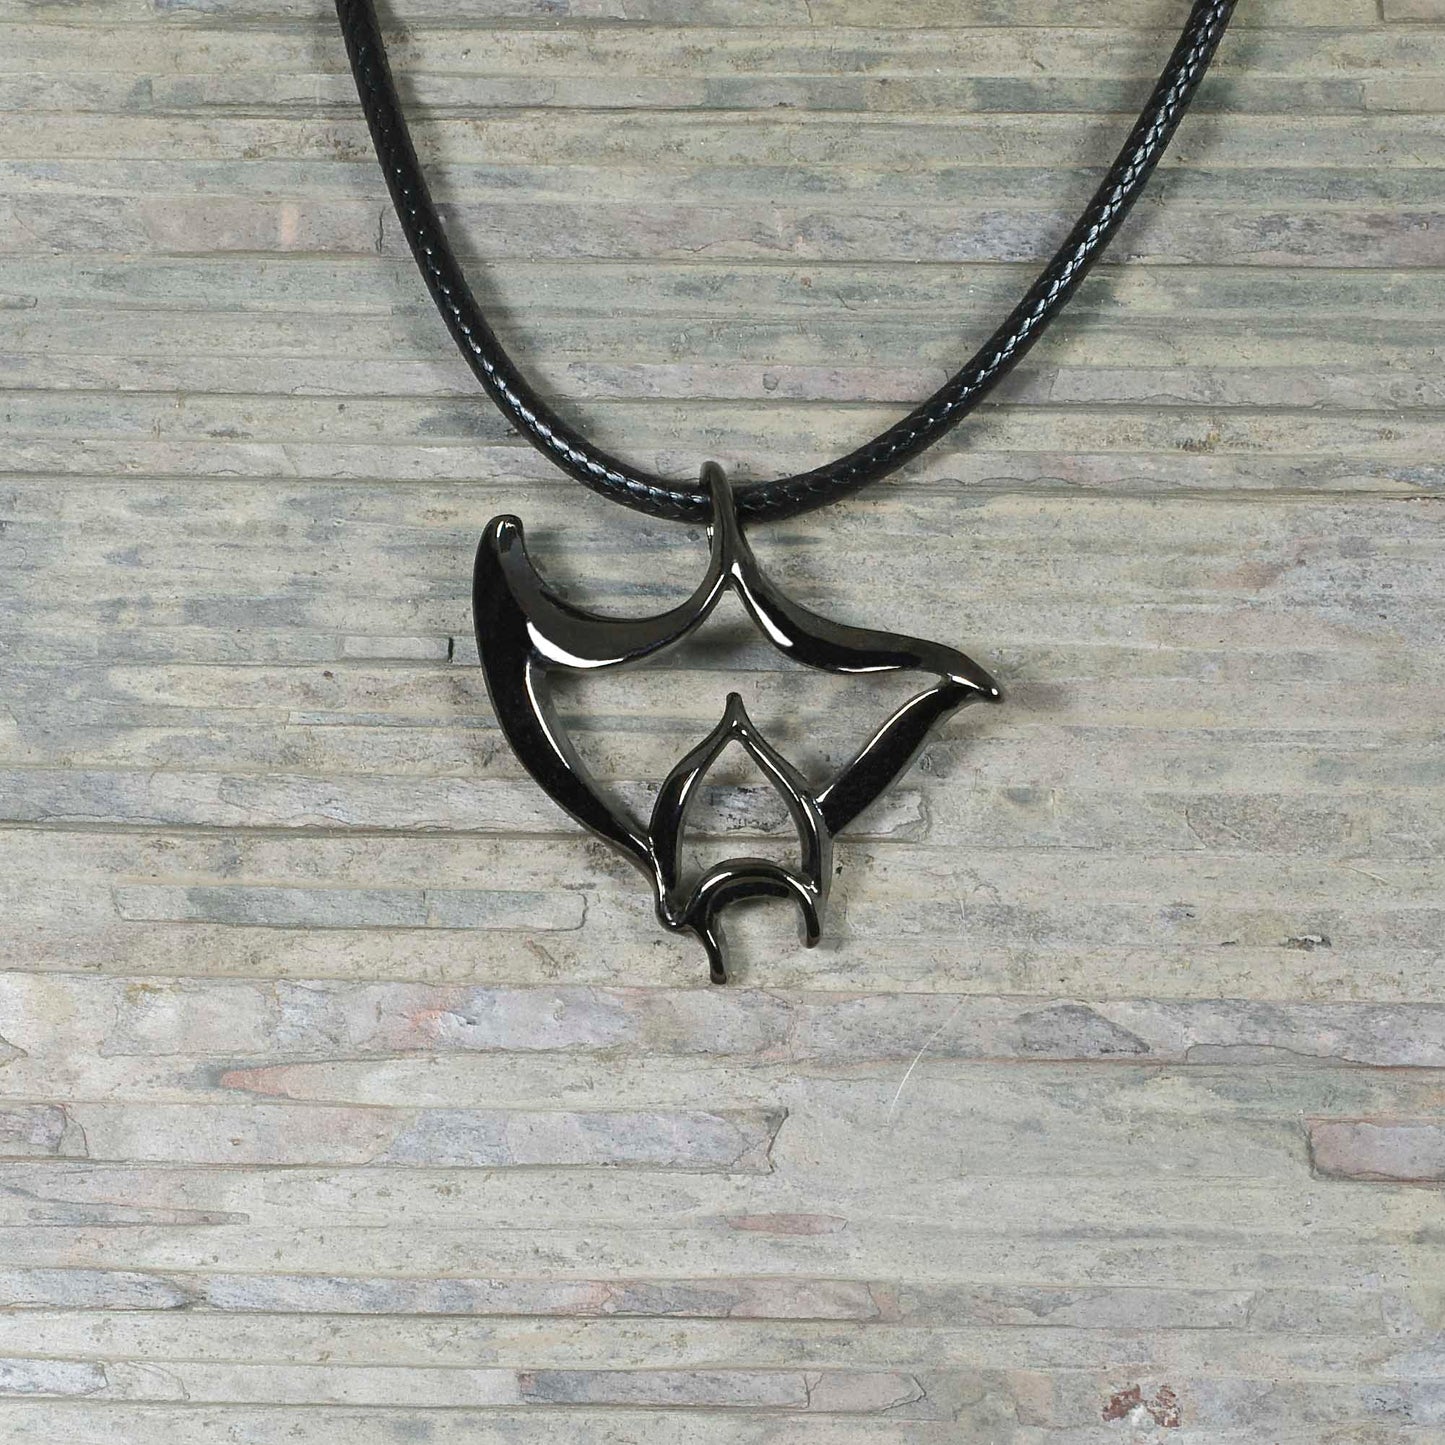 Manta Ray Necklace for Men and Women Hematite - Manta Ray Gift for Women and Men, Stingray Necklace Jet Black, Gifts for Divers, Hematite Jewelry - The Tool Store